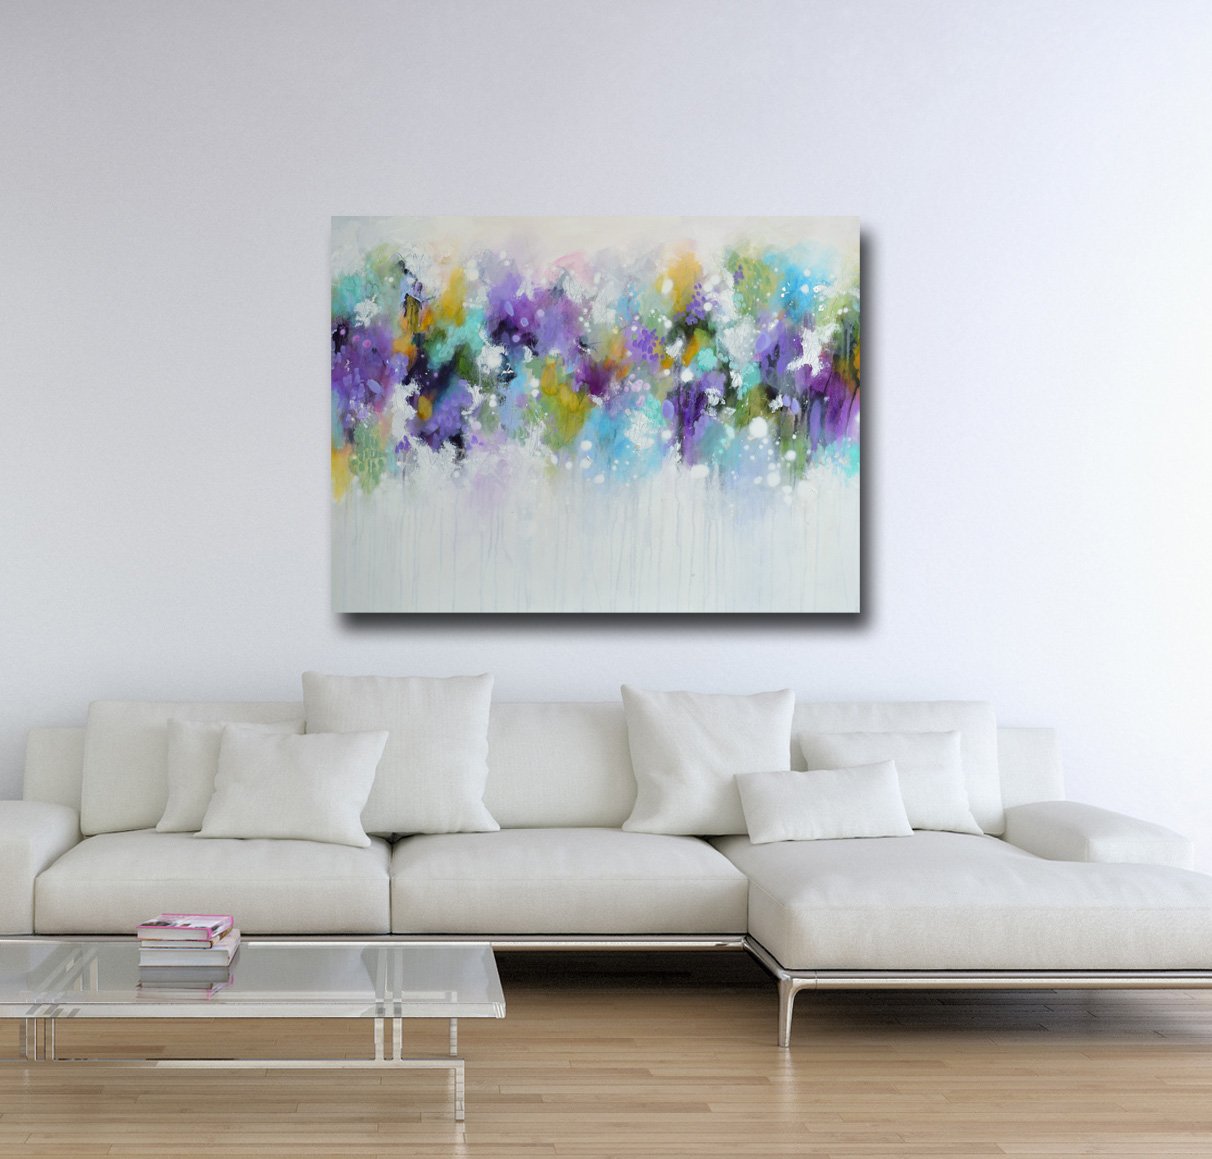 Large purple and green abstract painting